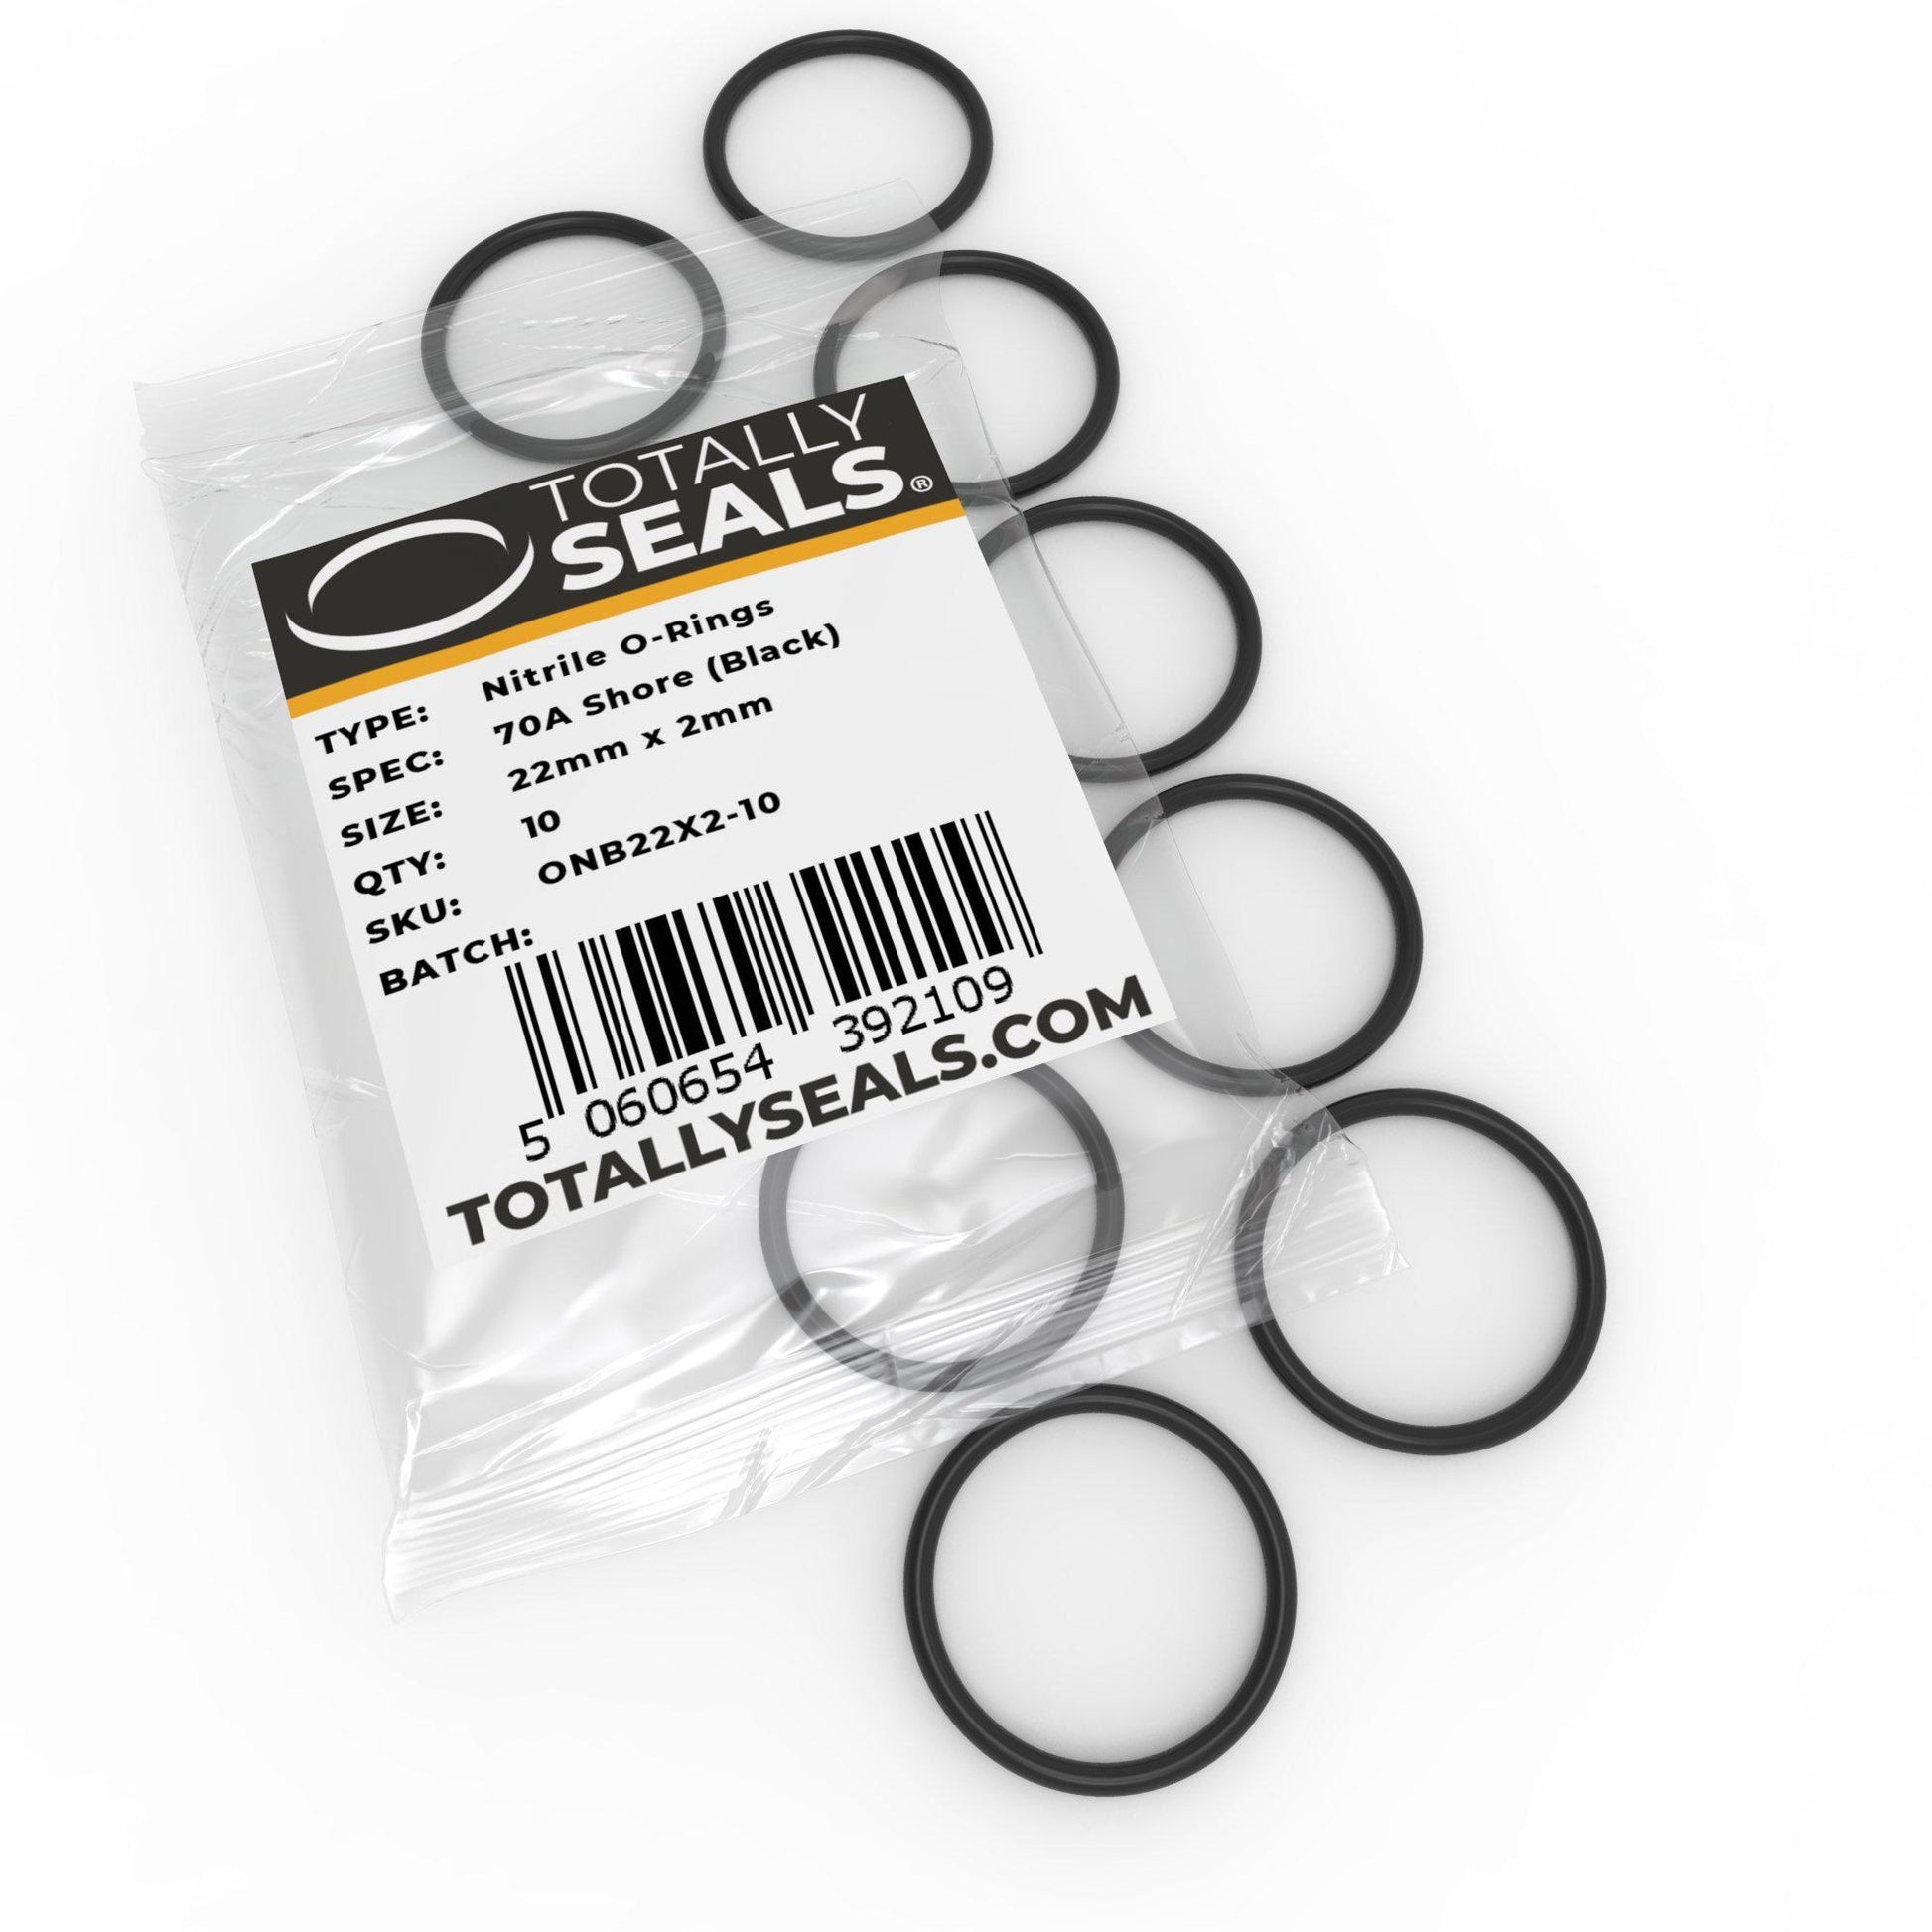 22mm x 2mm (26mm OD) Nitrile O-Rings - Totally Seals®